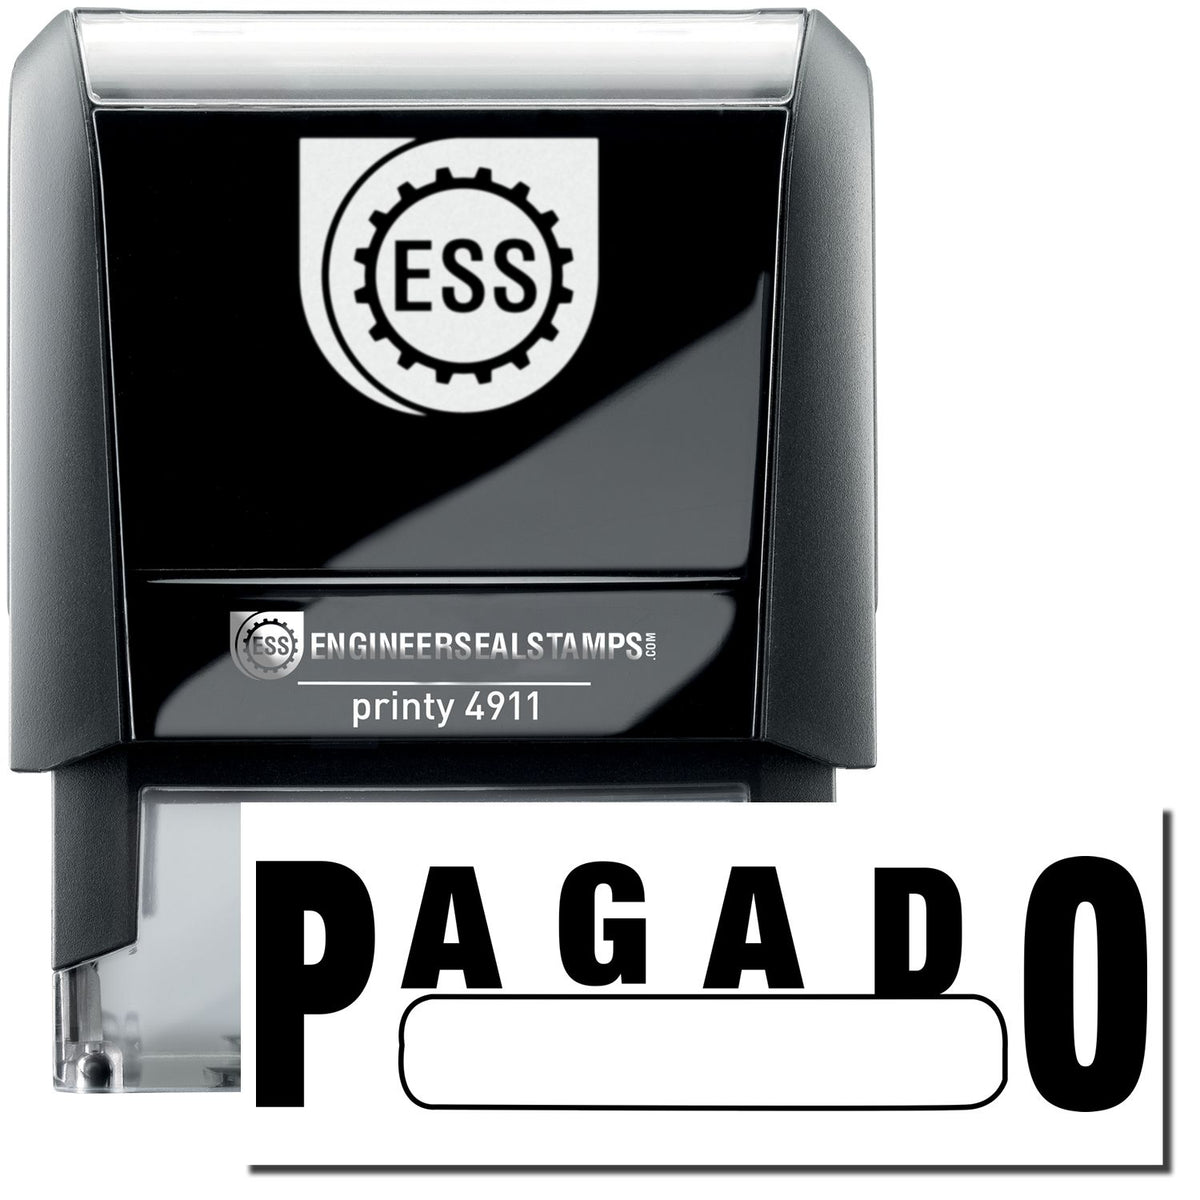 A self-inking stamp with a stamped image showing how the text &quot;PAGADO&quot; with a box under it is displayed after stamping.